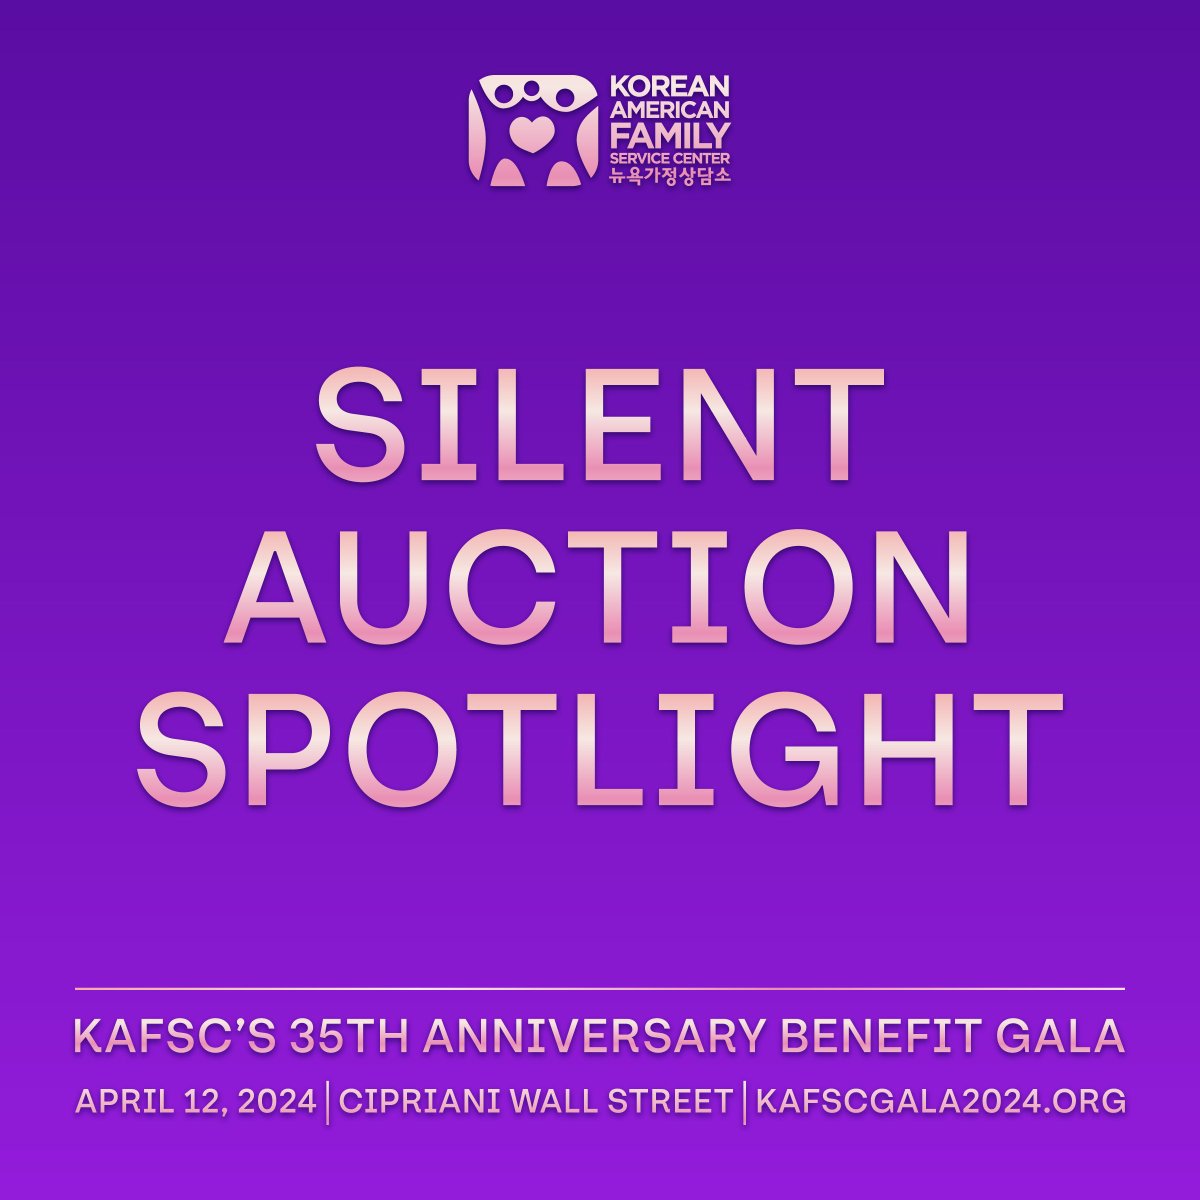 🌟The countdown is on!🌟Only 1 day until KAFSC’s 35th Anniversary Benefit Gala! Don't miss out on our Live and Silent Auction, which will help support KAFSC's vital services, providing assistance to survivors of domestic violence and sexual assault.💜